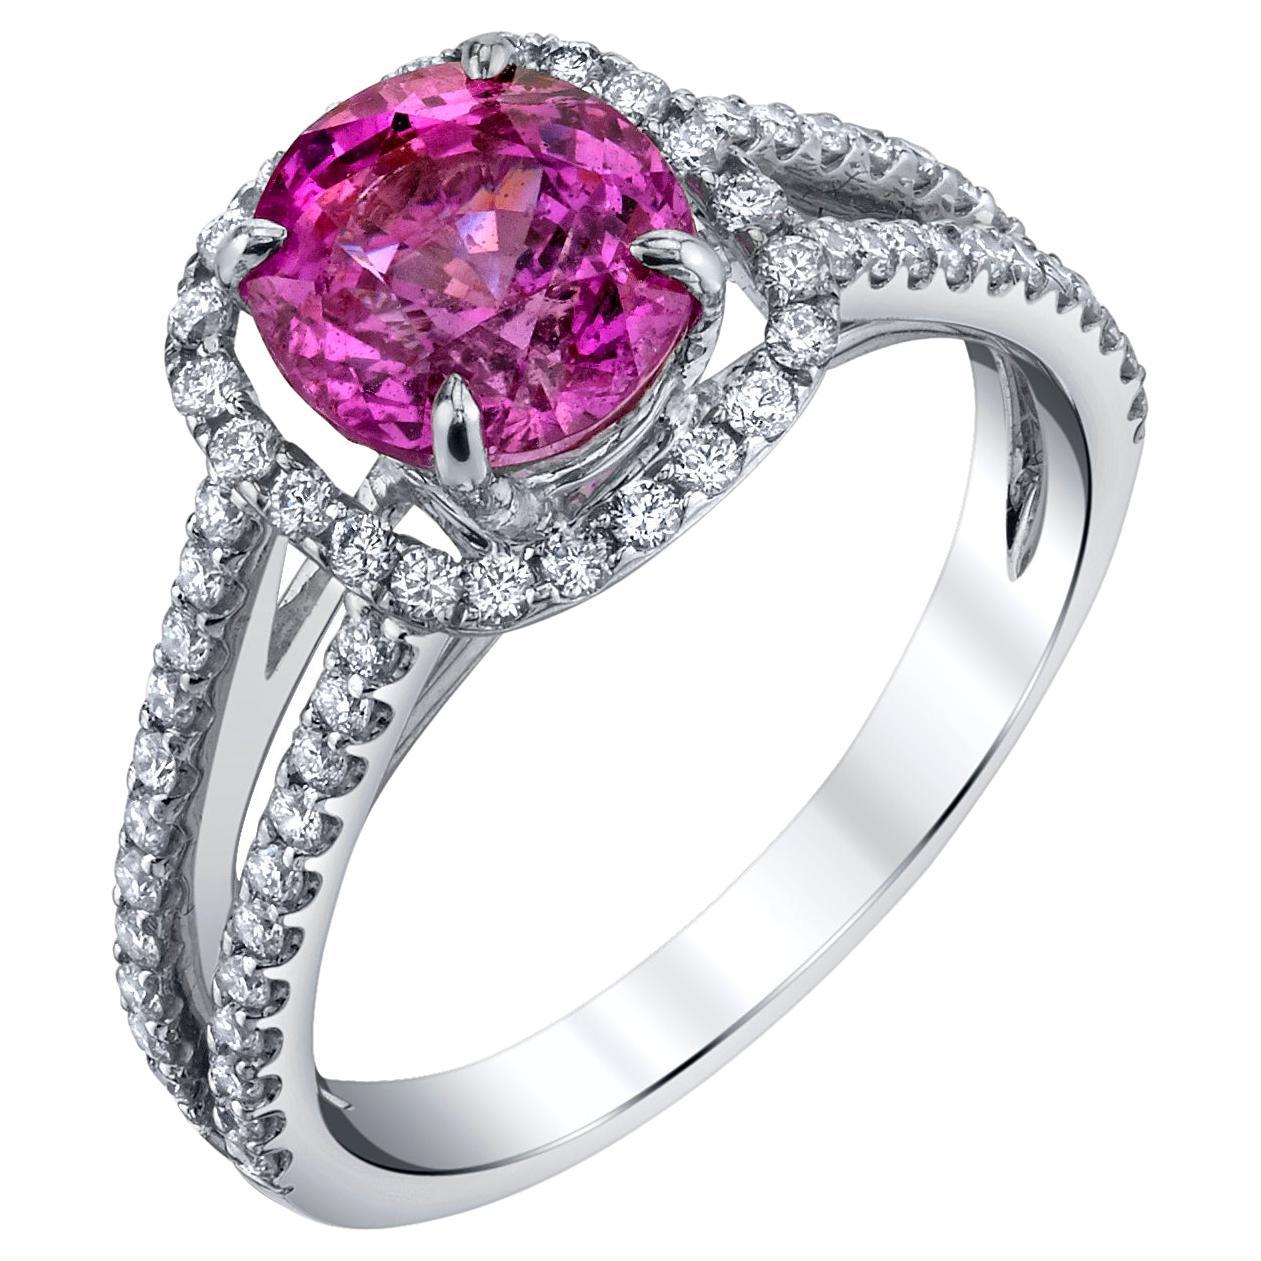 Pink Sapphire and Diamond Halo Engagement Ring in 18k White Gold, 2.42 Carats 